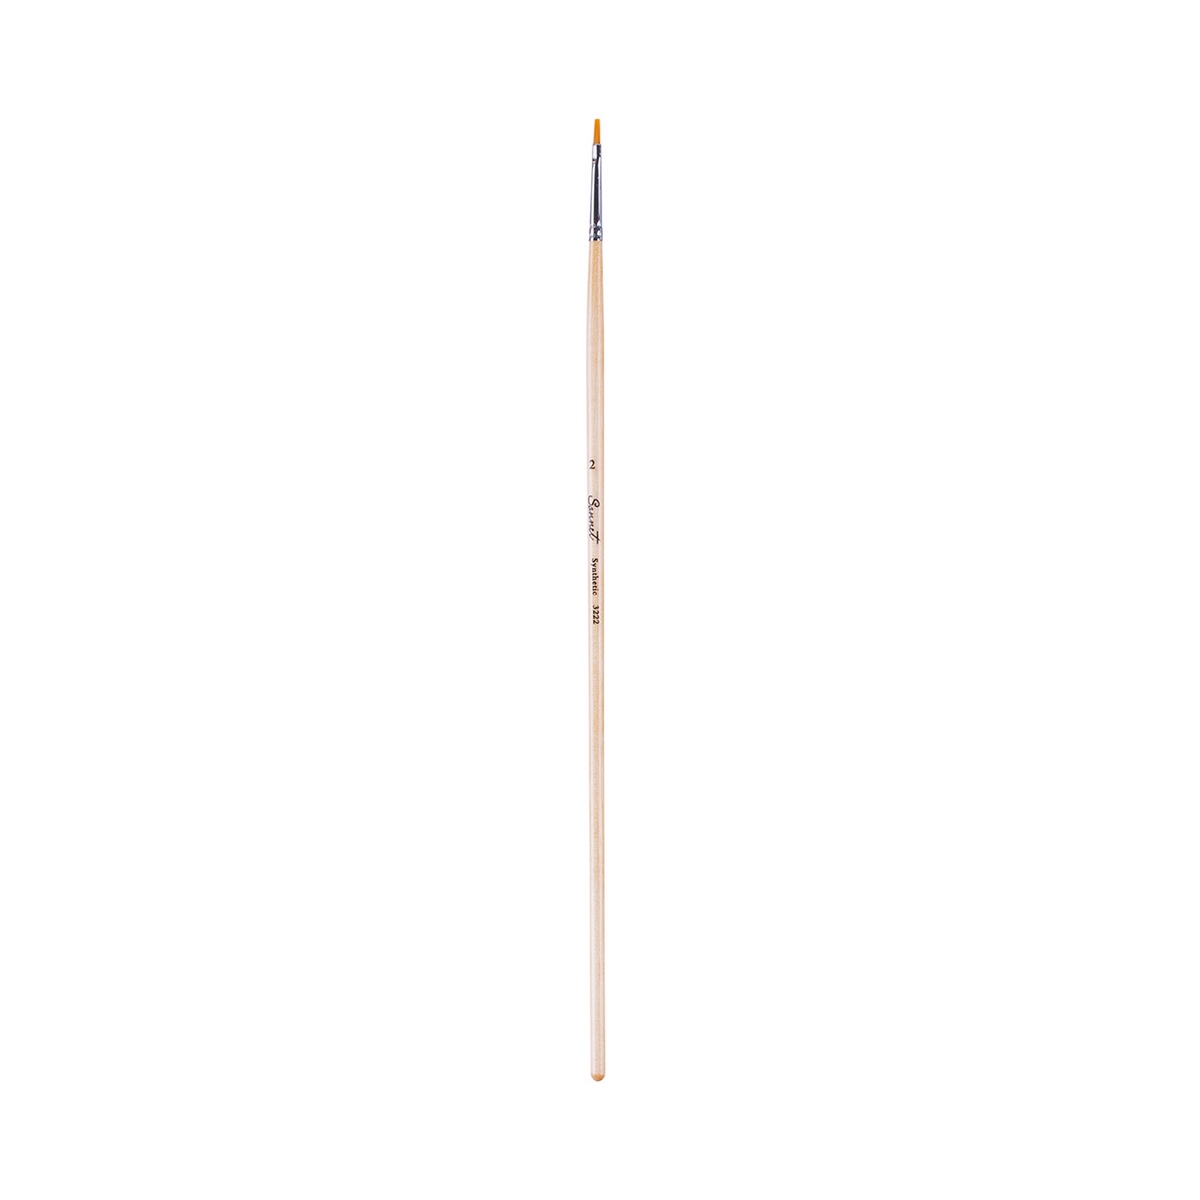 Synthetic brushes "Sonnet", flat, long handle